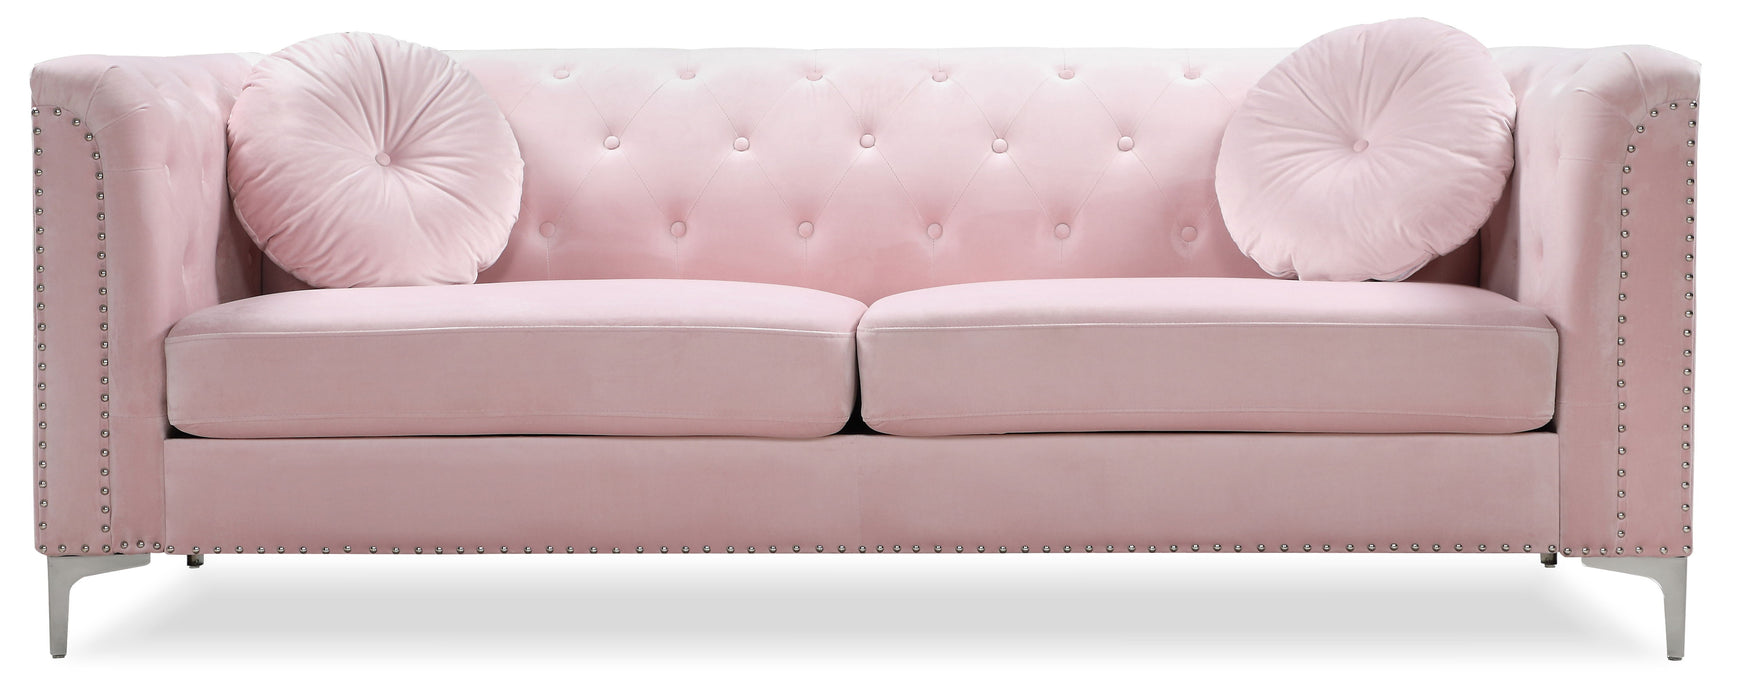 Pompano - G894A-S Sofa (2 Boxes) - Pink